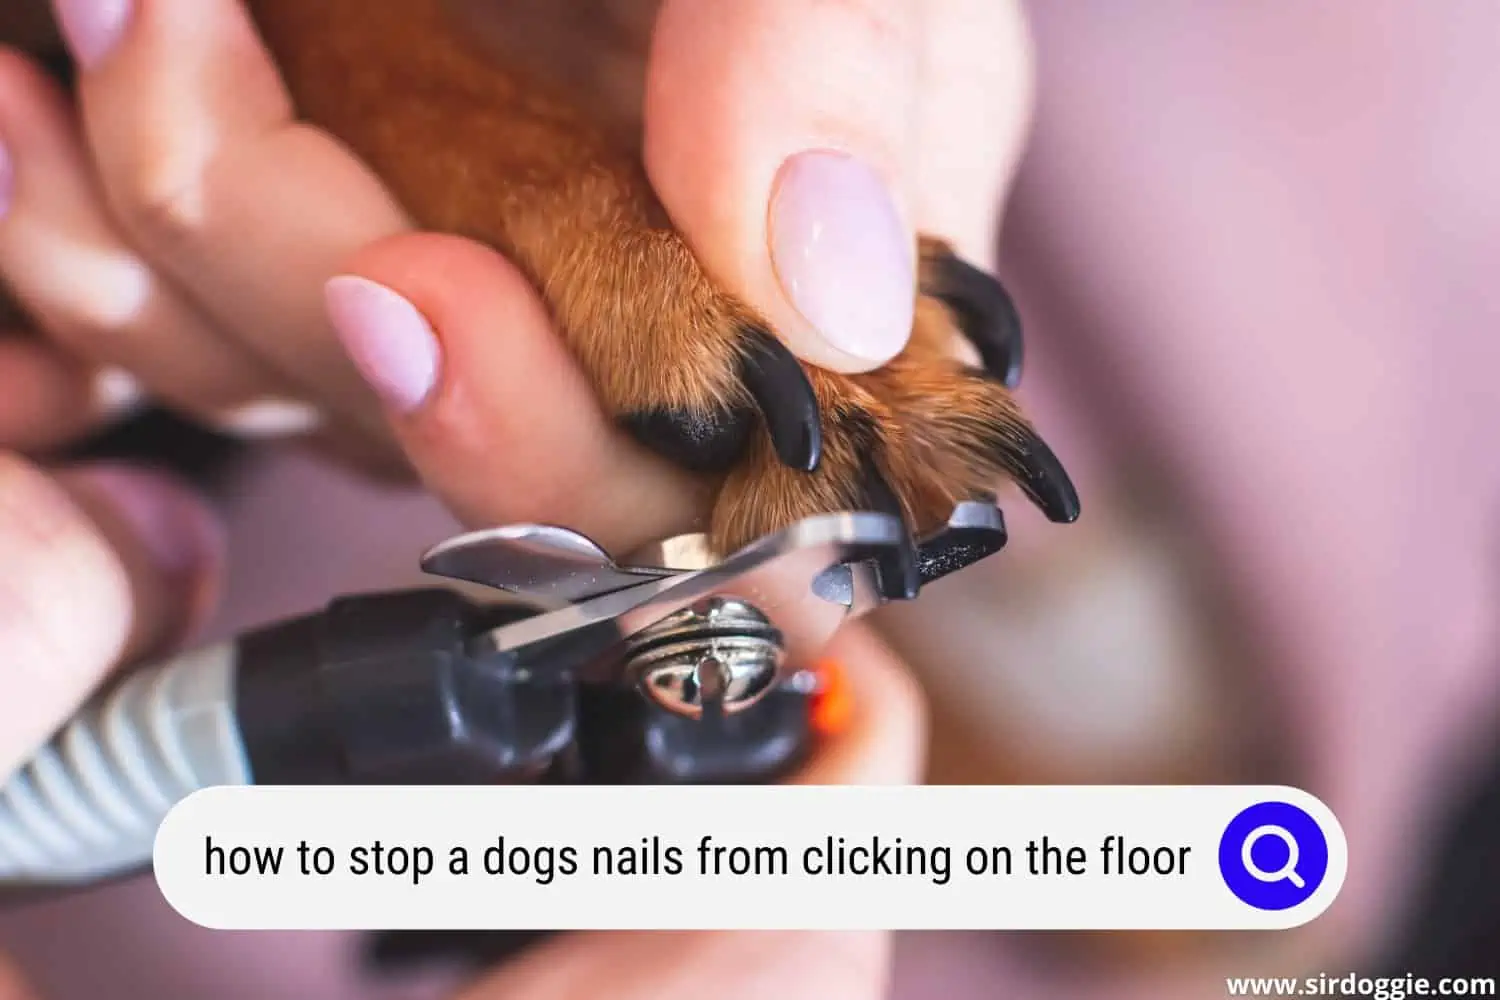 how to stop dogs nails from clicking on the floor